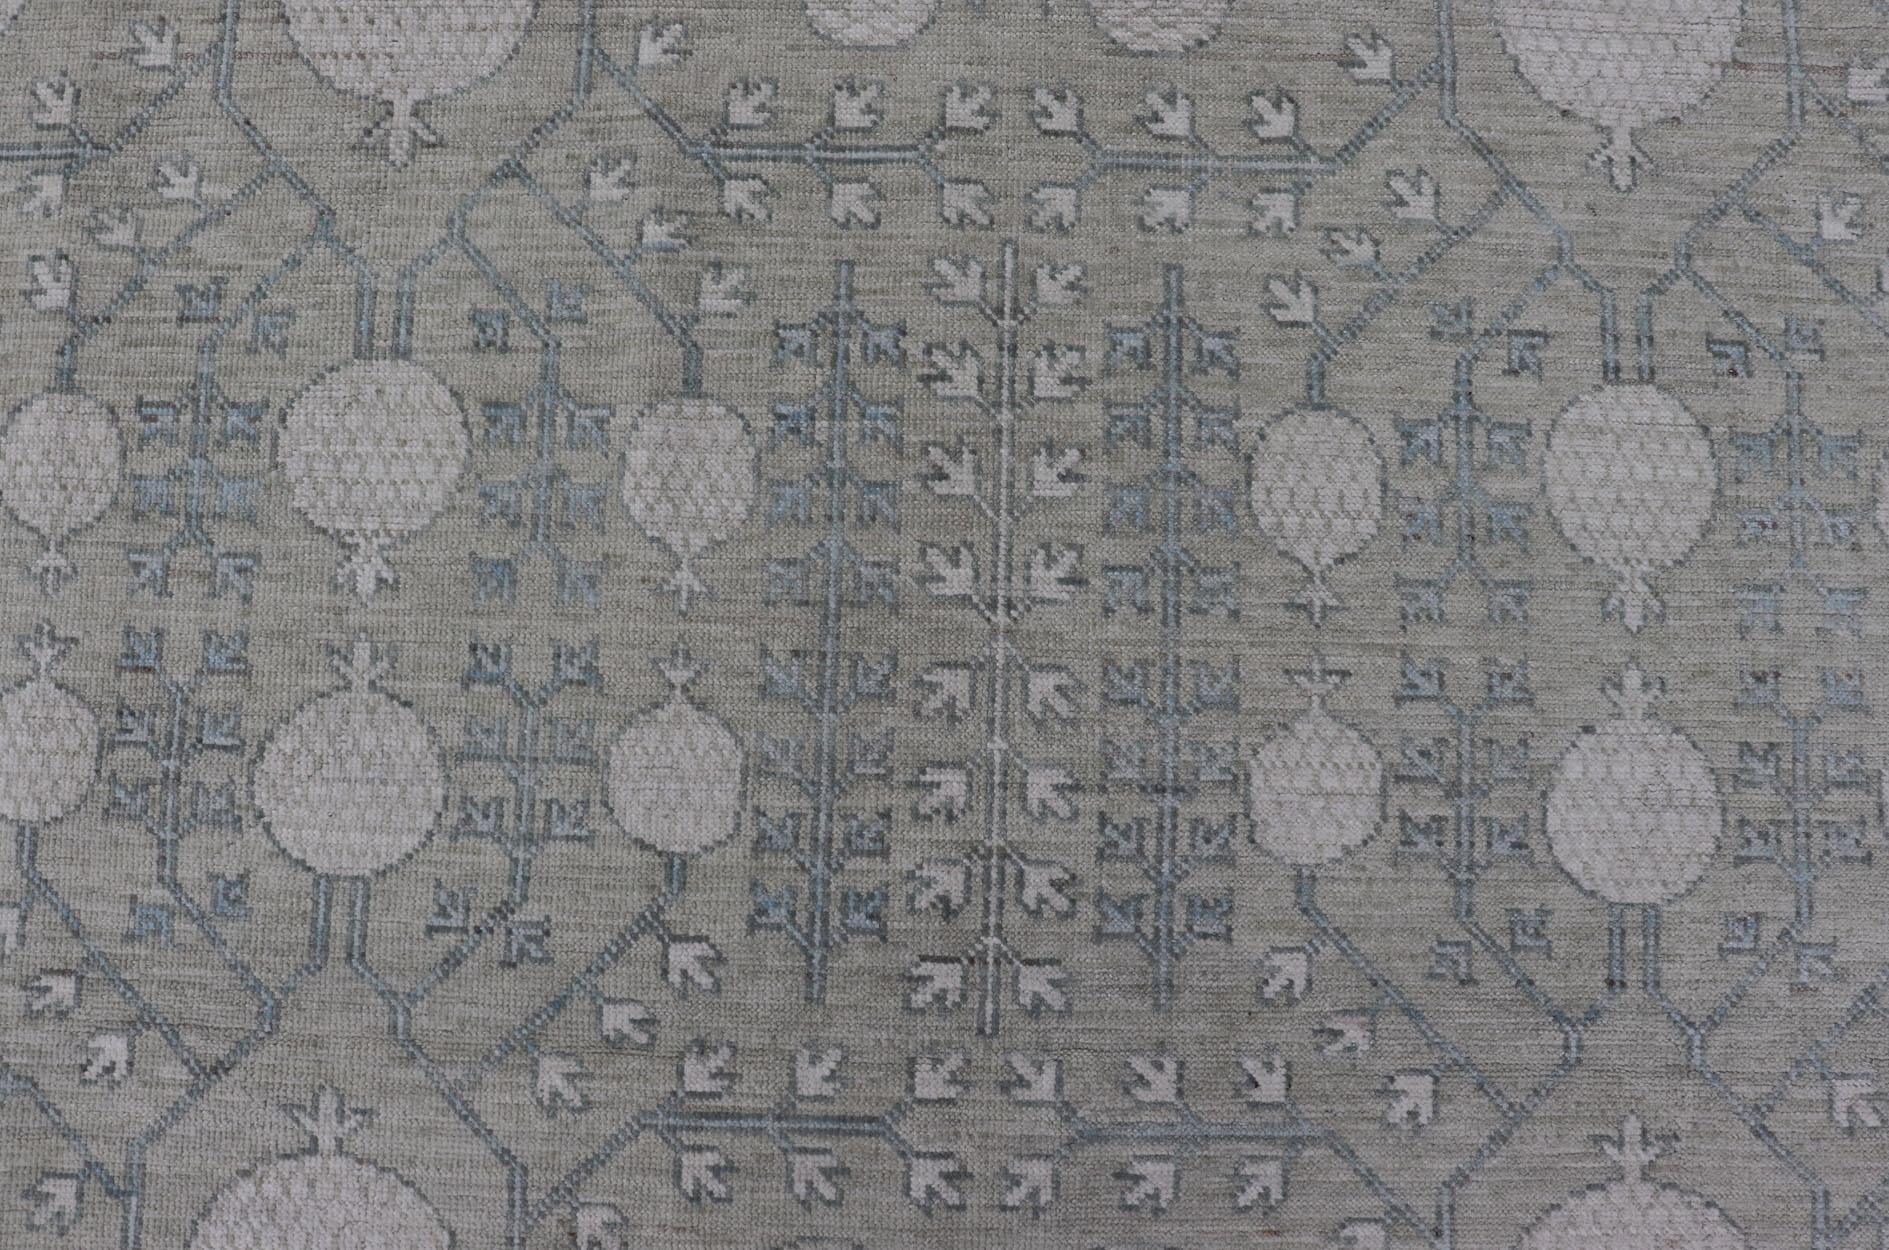 Modern Tribal Khotan Rug in Shades of Cream, Green, Blue, and Gray For Sale 4